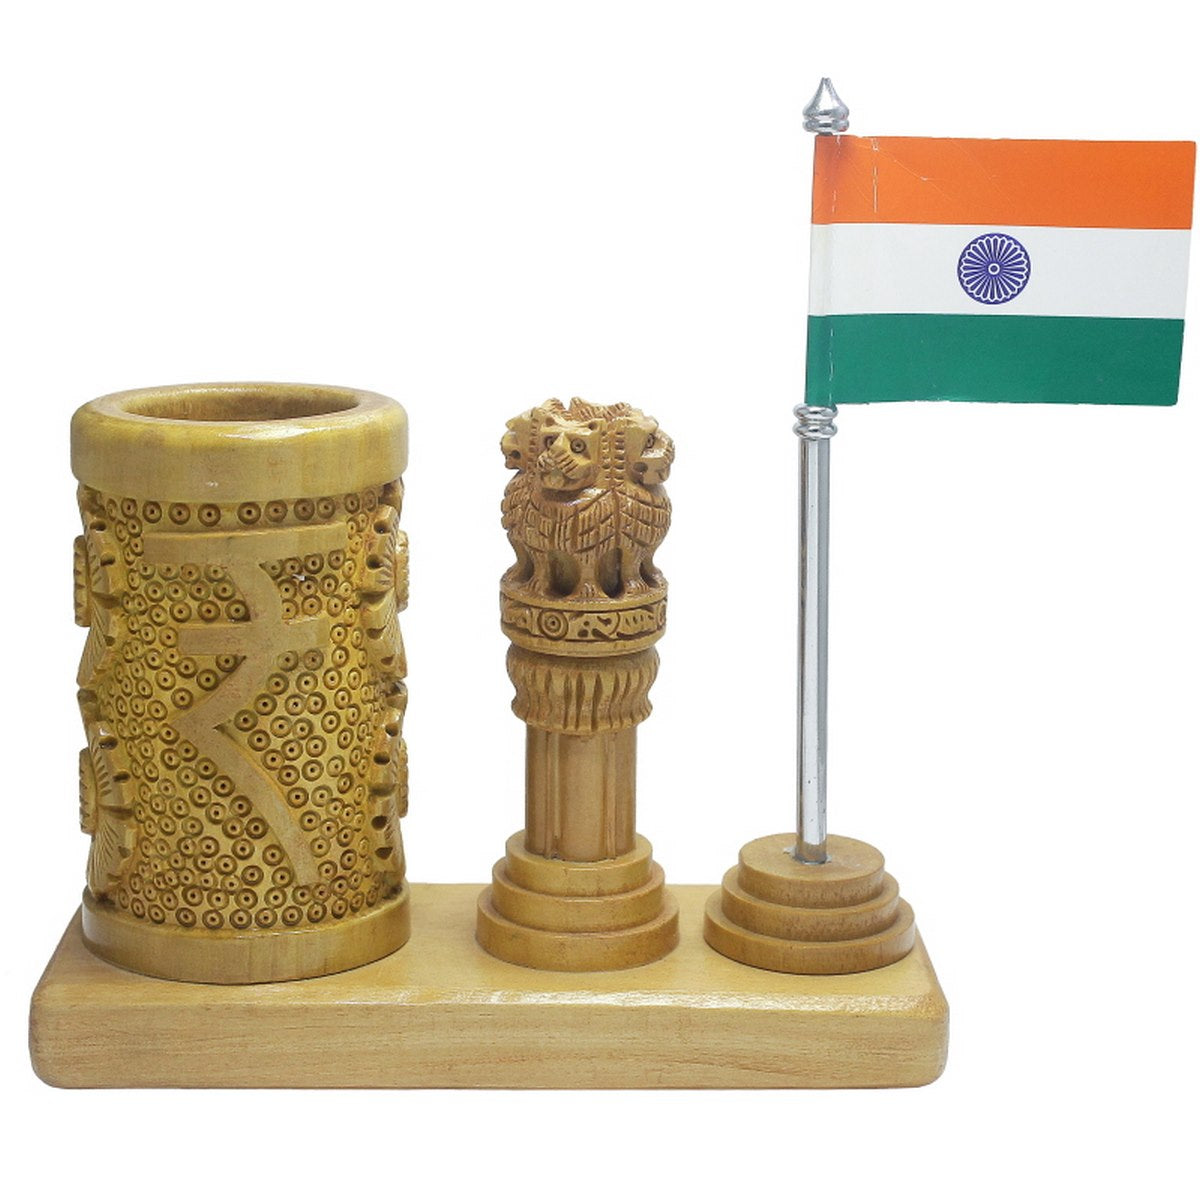 Rupee Design Pen Stand with Ashoka Pillar and Indian Flag Table Top - For Corporate Gifting, Office, School, College Use, Independence Day, Republic Day Gift Item JAWTTP00